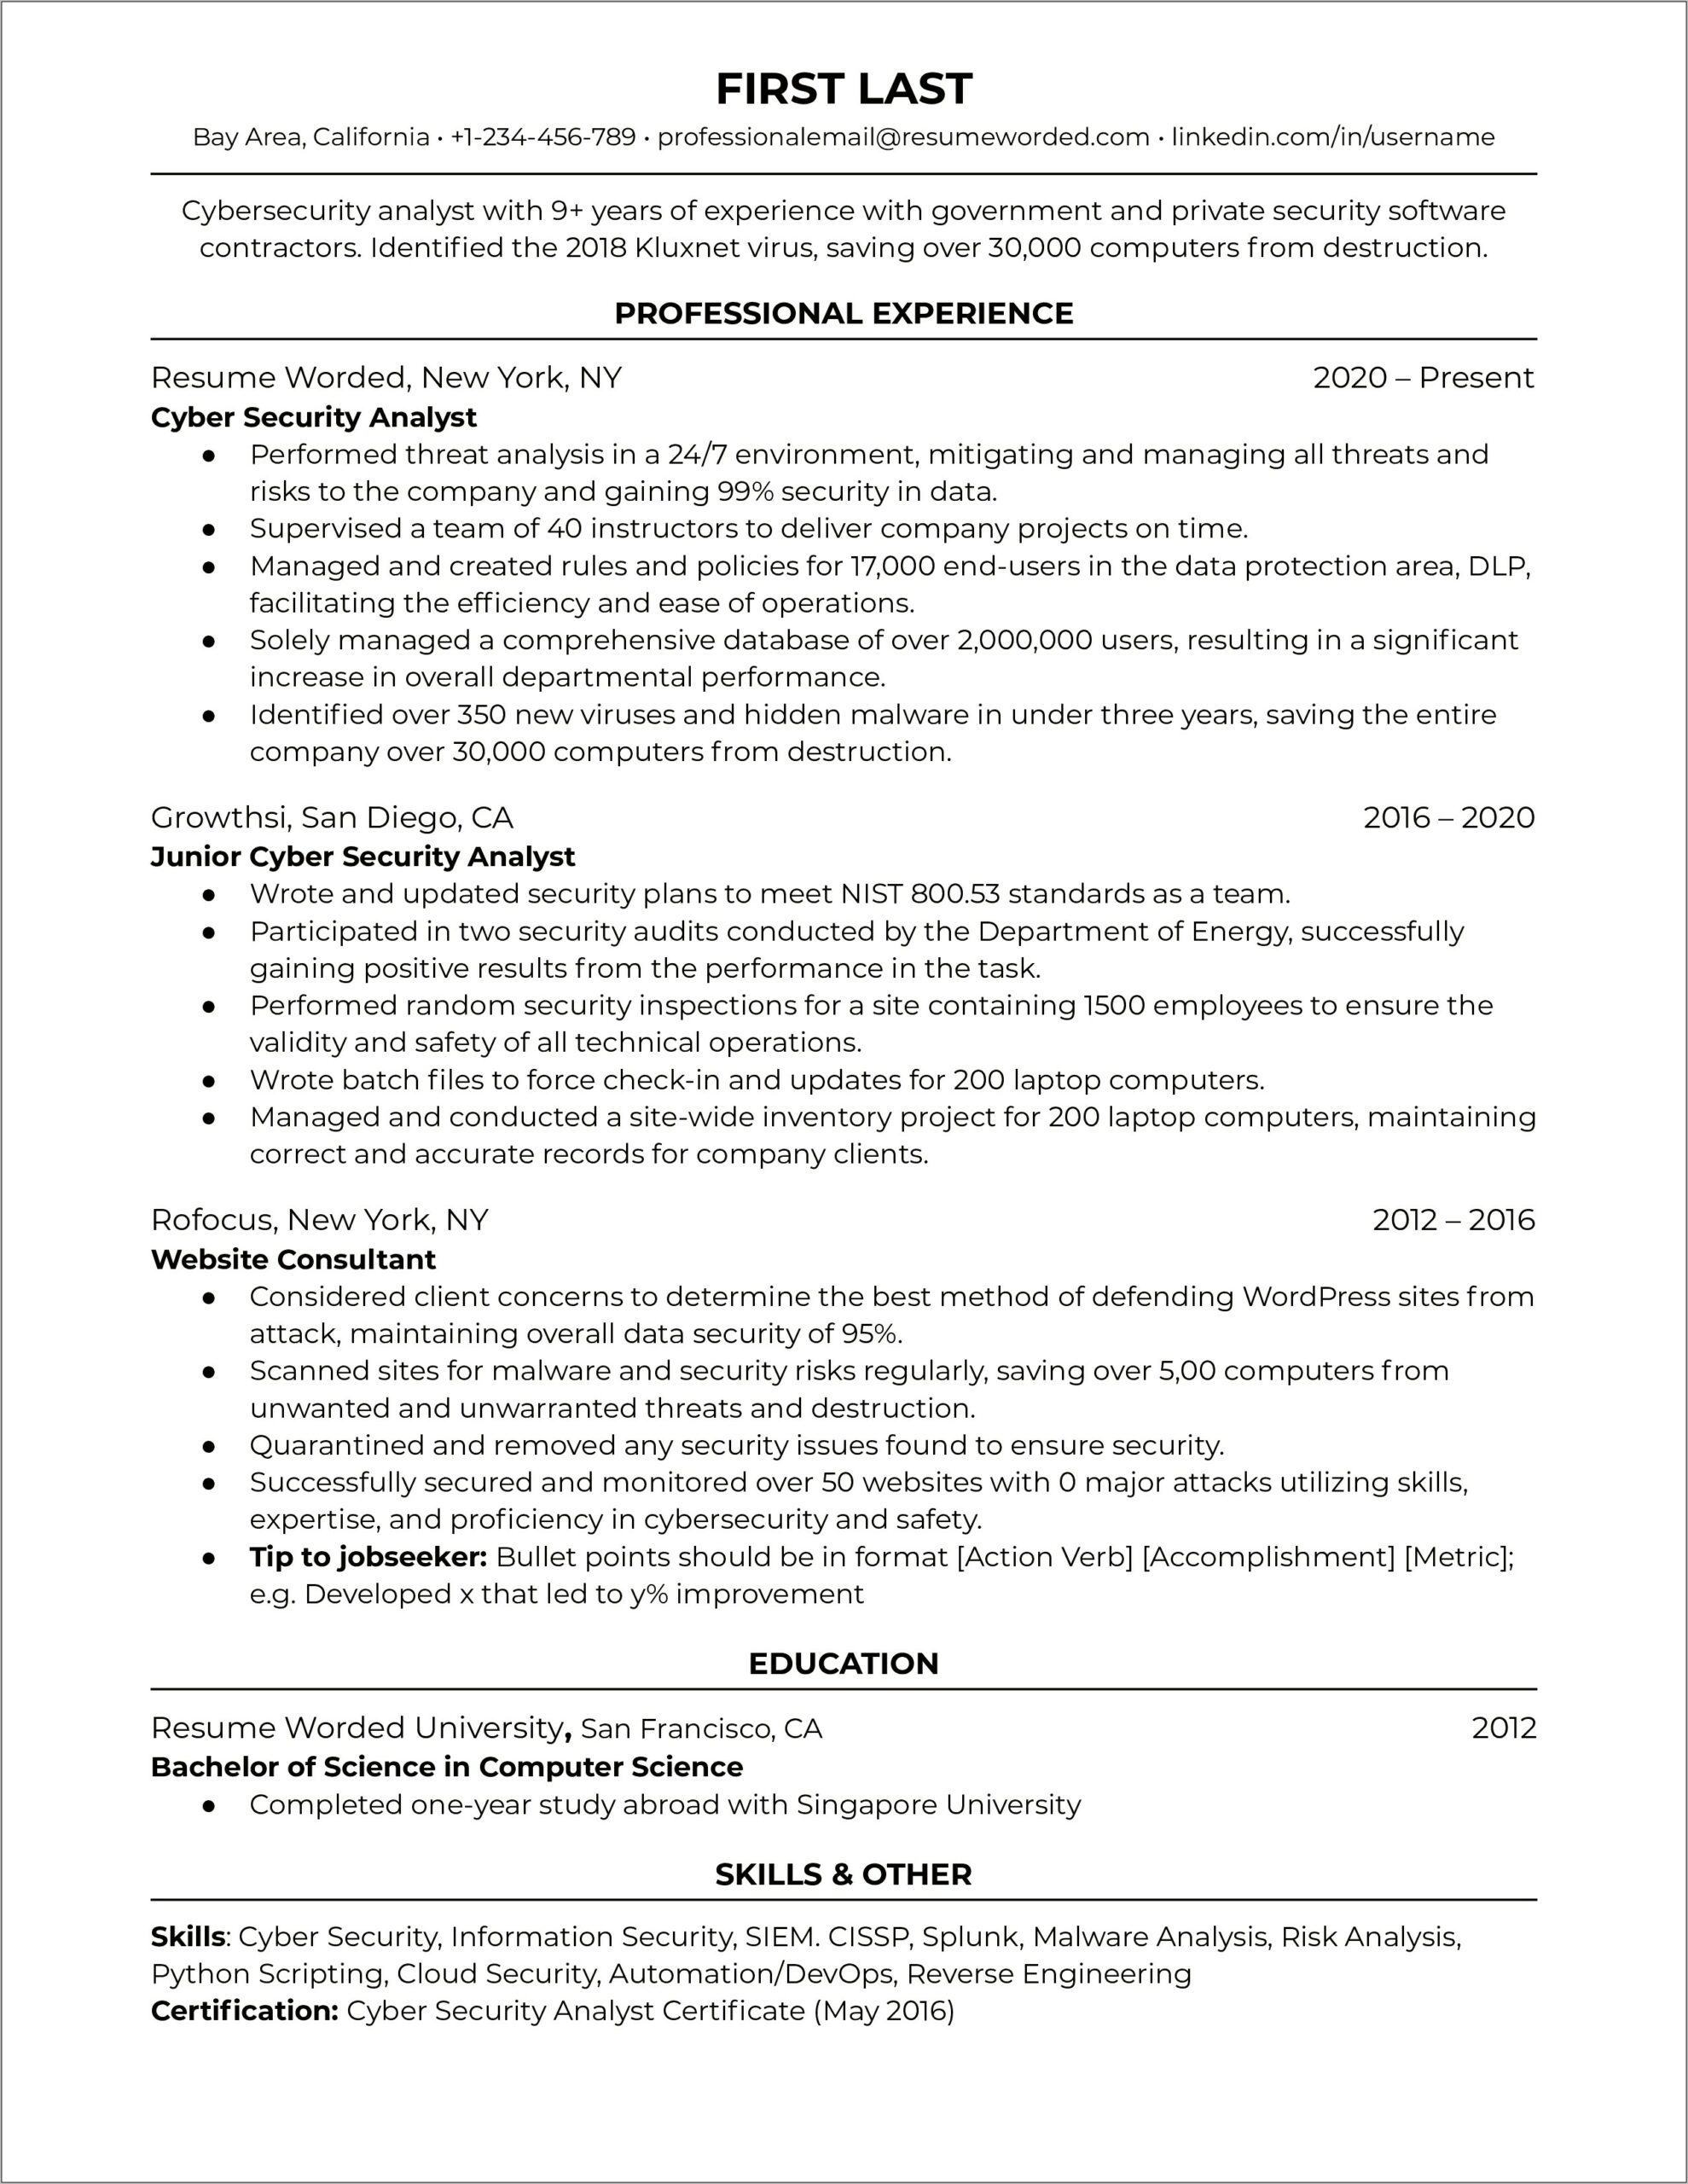 Resume For Security Officer With No Experience